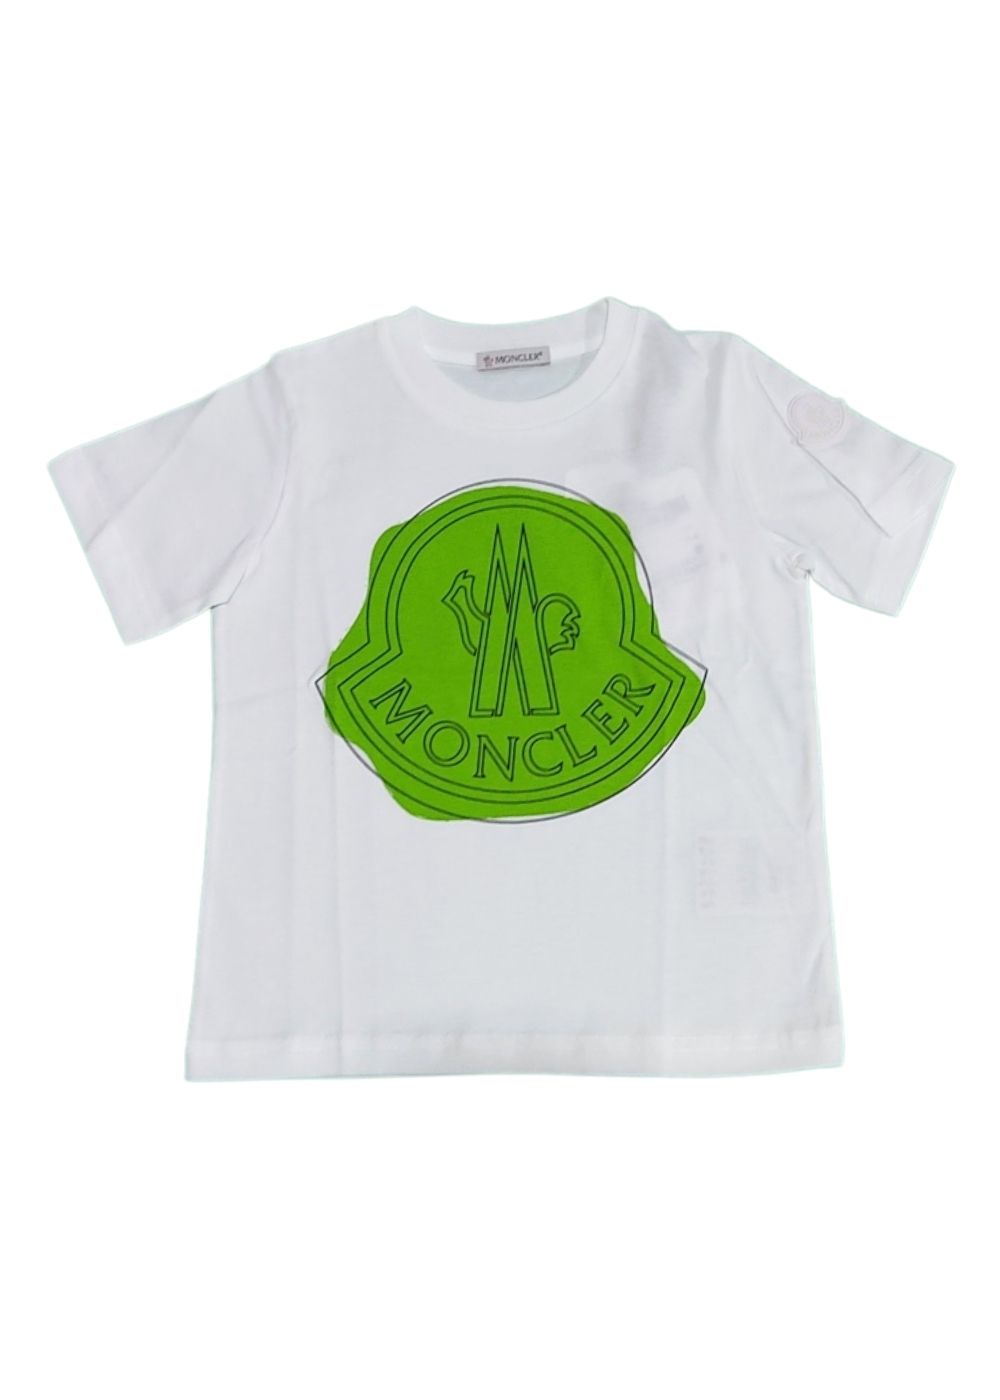 Featured image for “Moncler T-shirt Logo Verde”